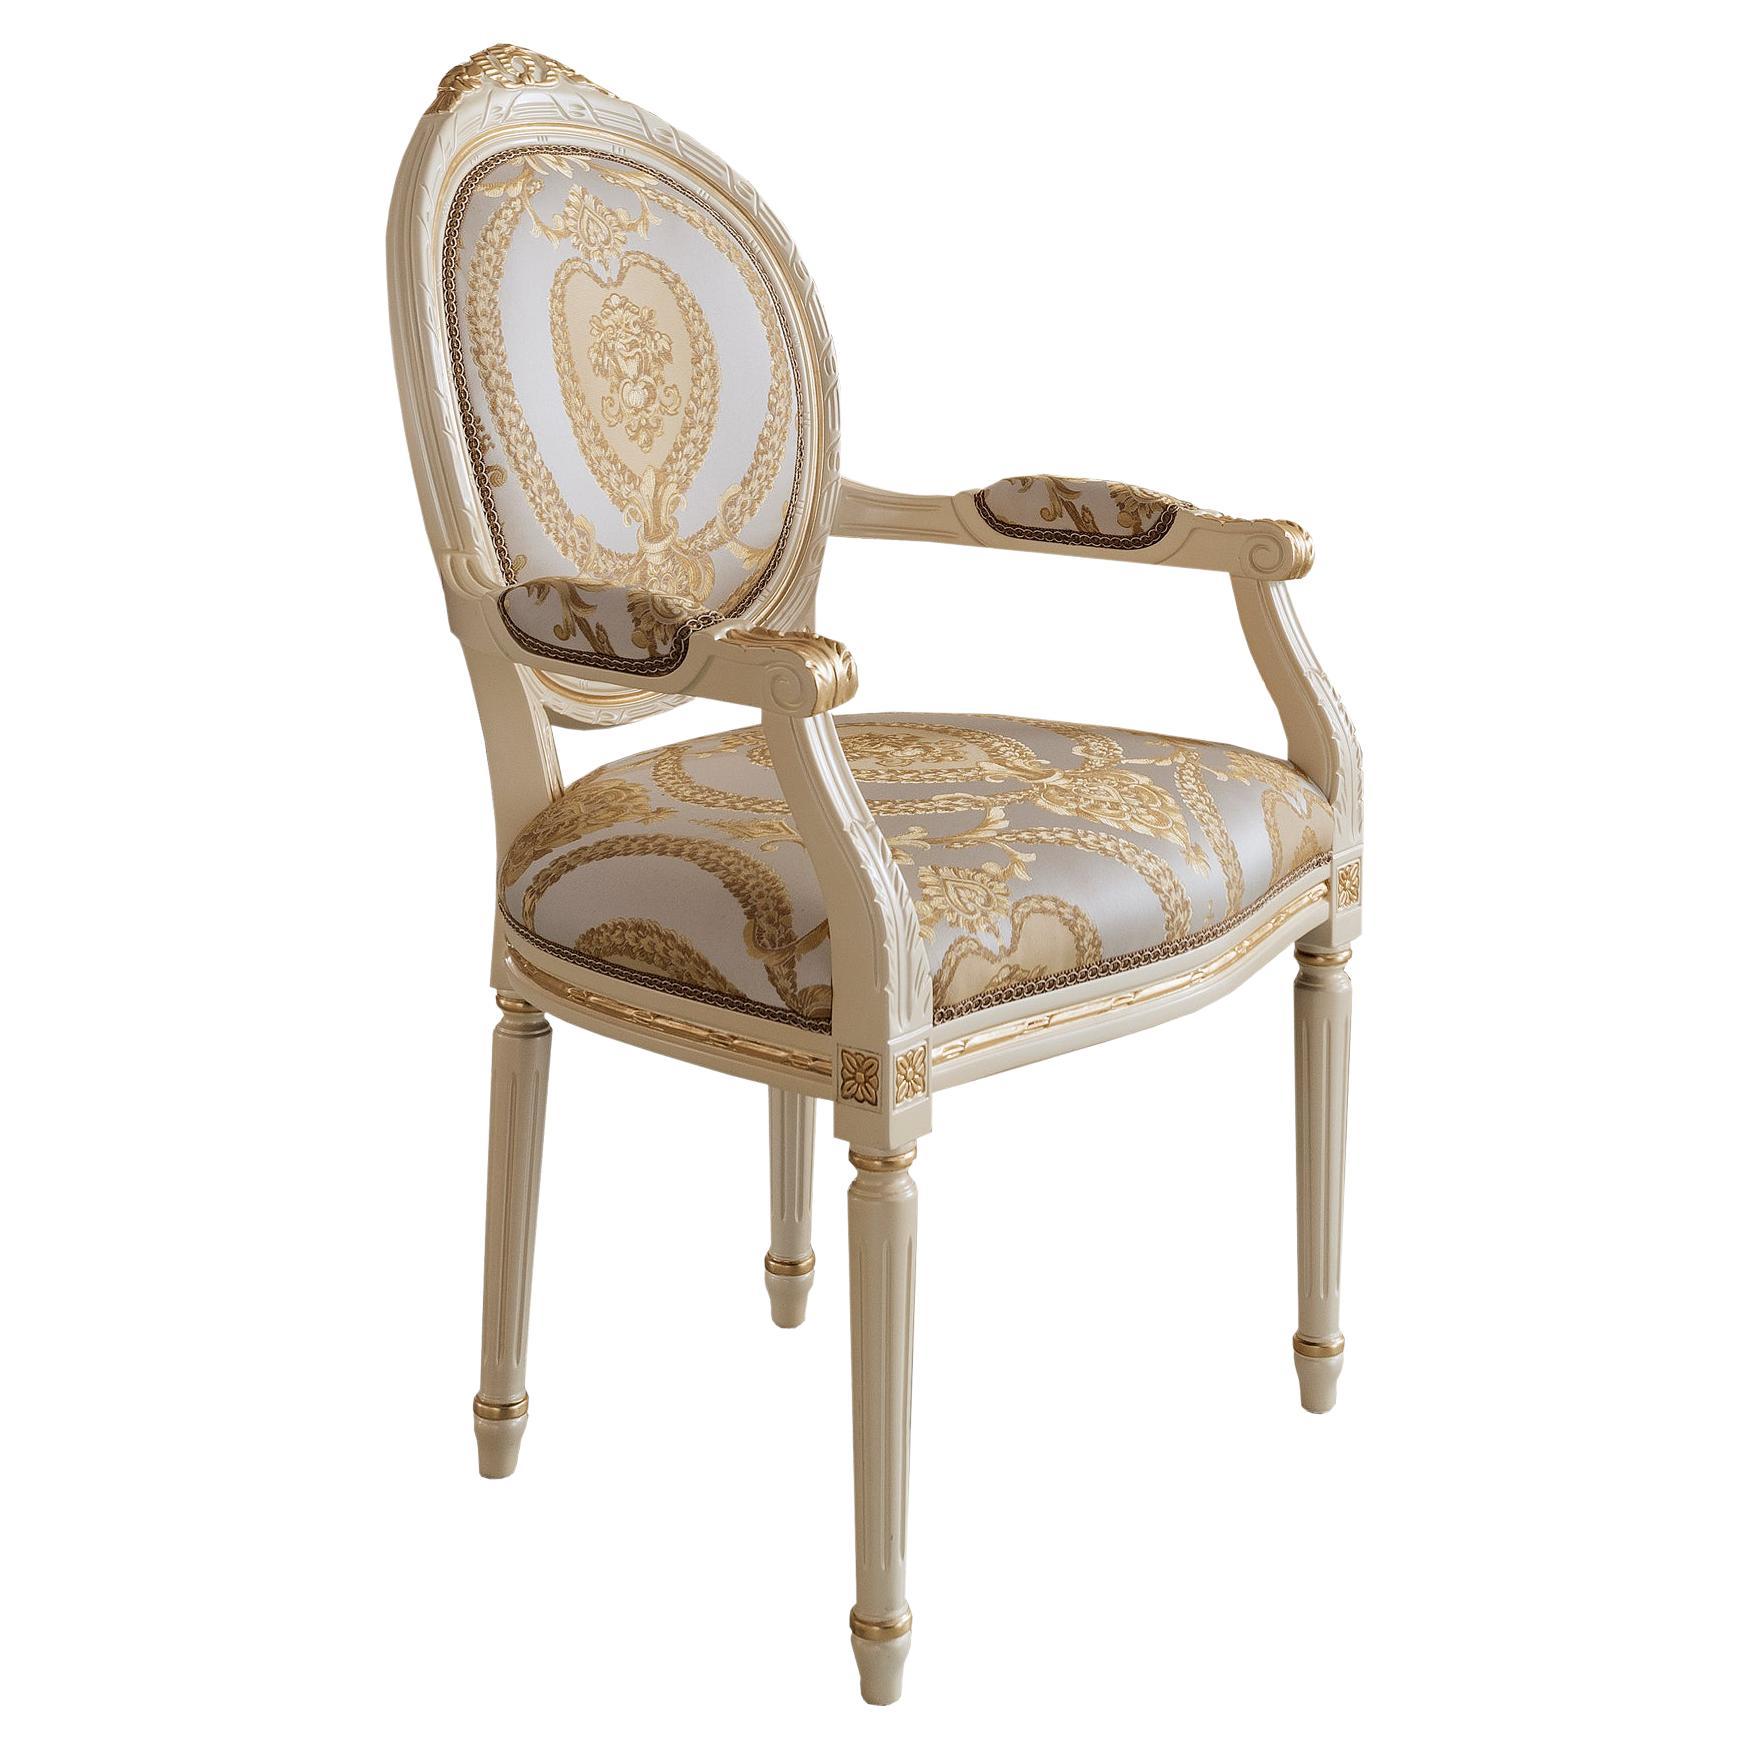 21st Century Empire-Style White Lacquered Chair by Modenese Gastone Interiors For Sale